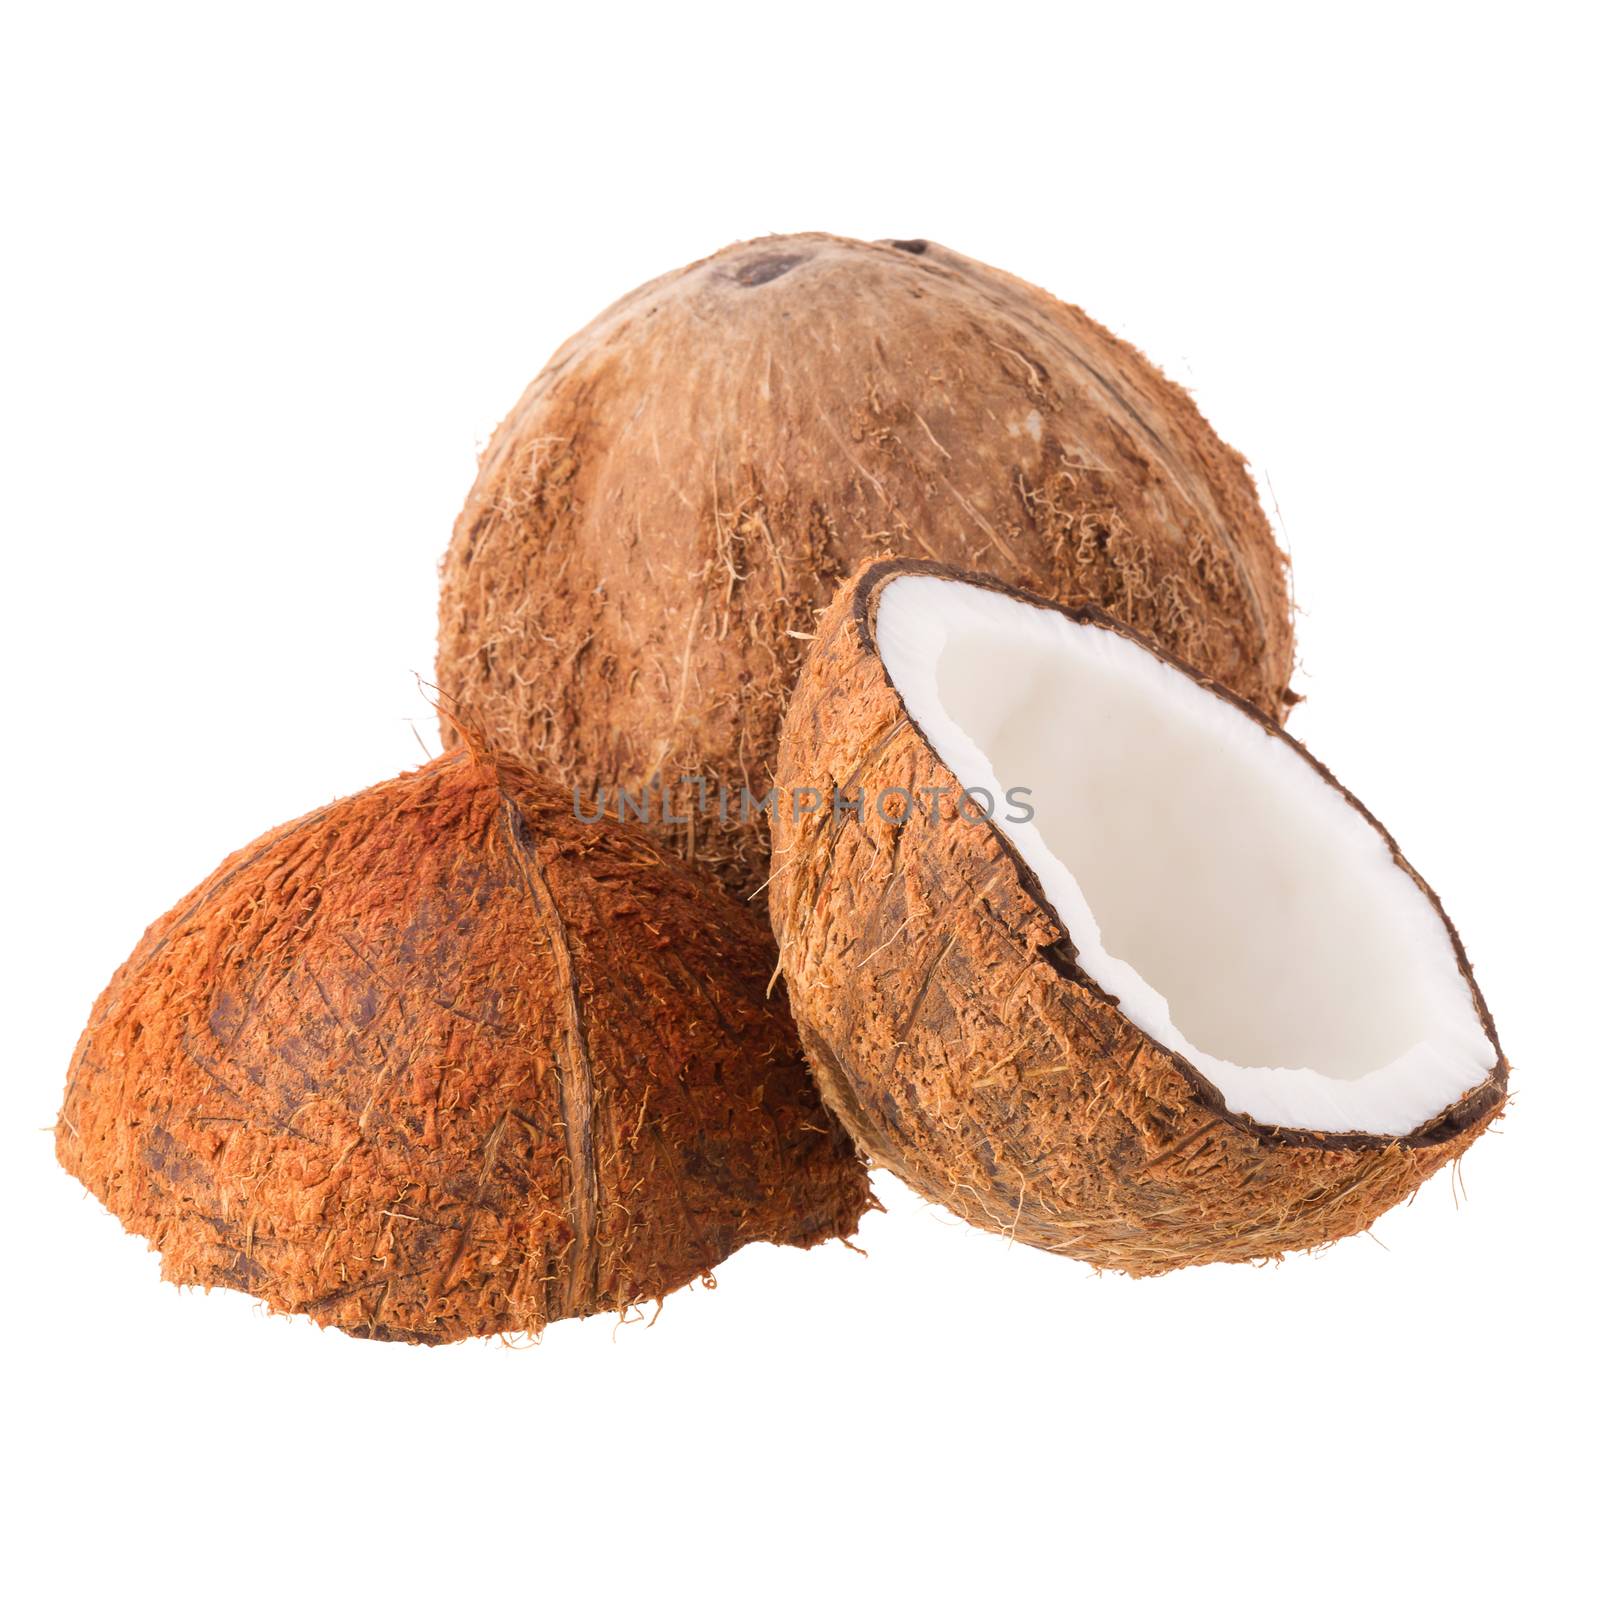 Coconut for oil preparing isolated on white background.